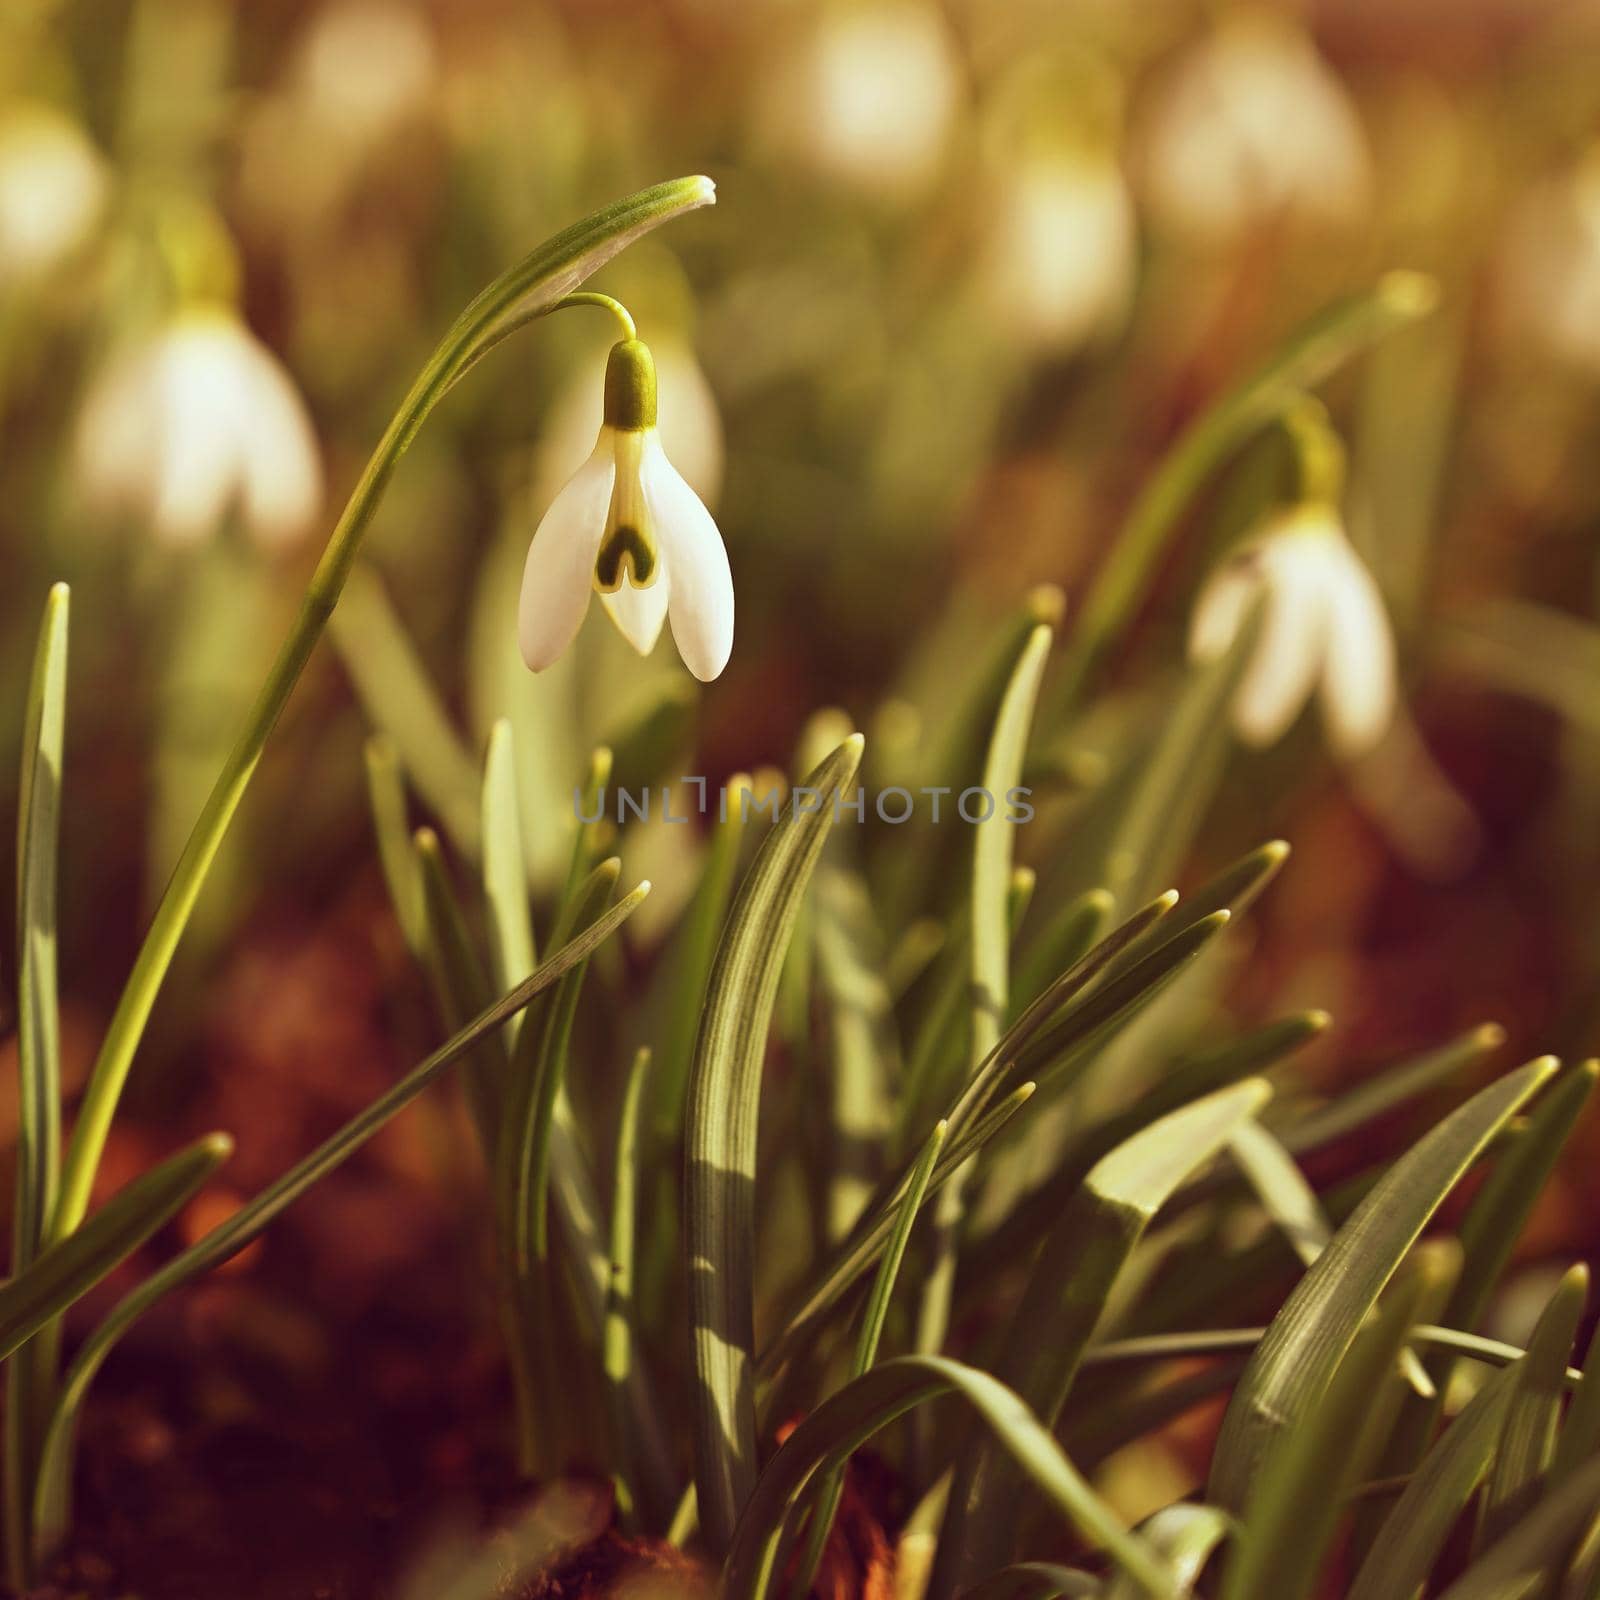 Spring flowers. The first flowering white plants in spring. Natural colorful background. (Galanthus nivalis) by Montypeter